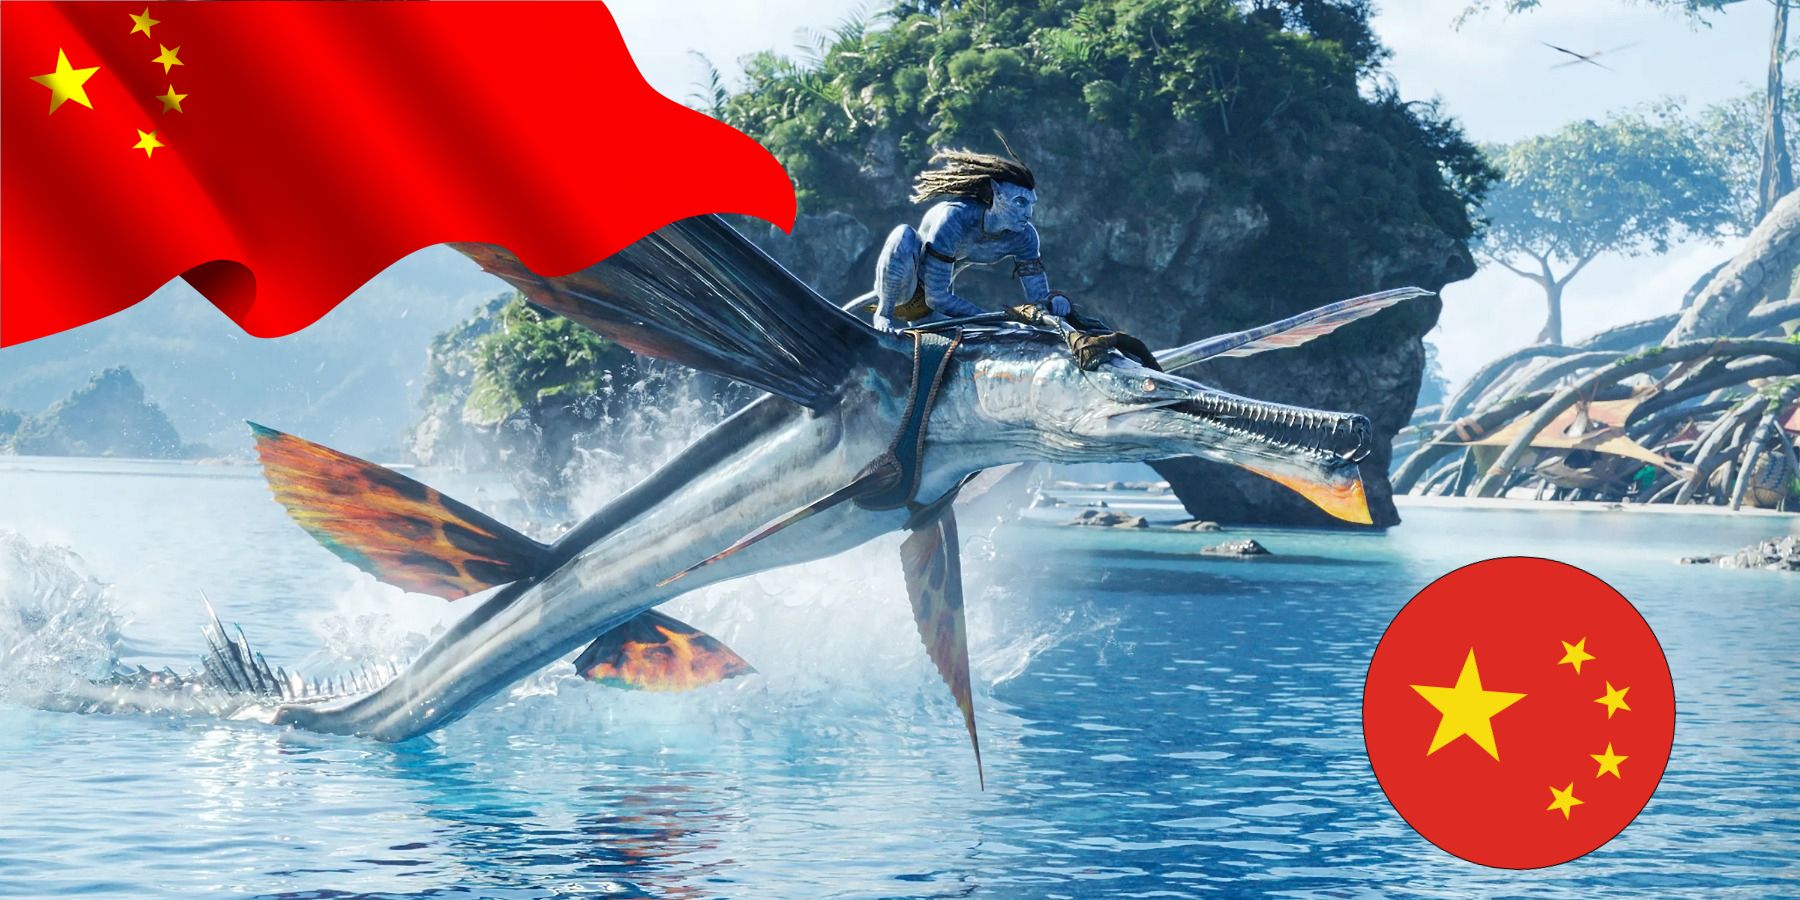 Avatar: The Way of Water sea scene with China flag